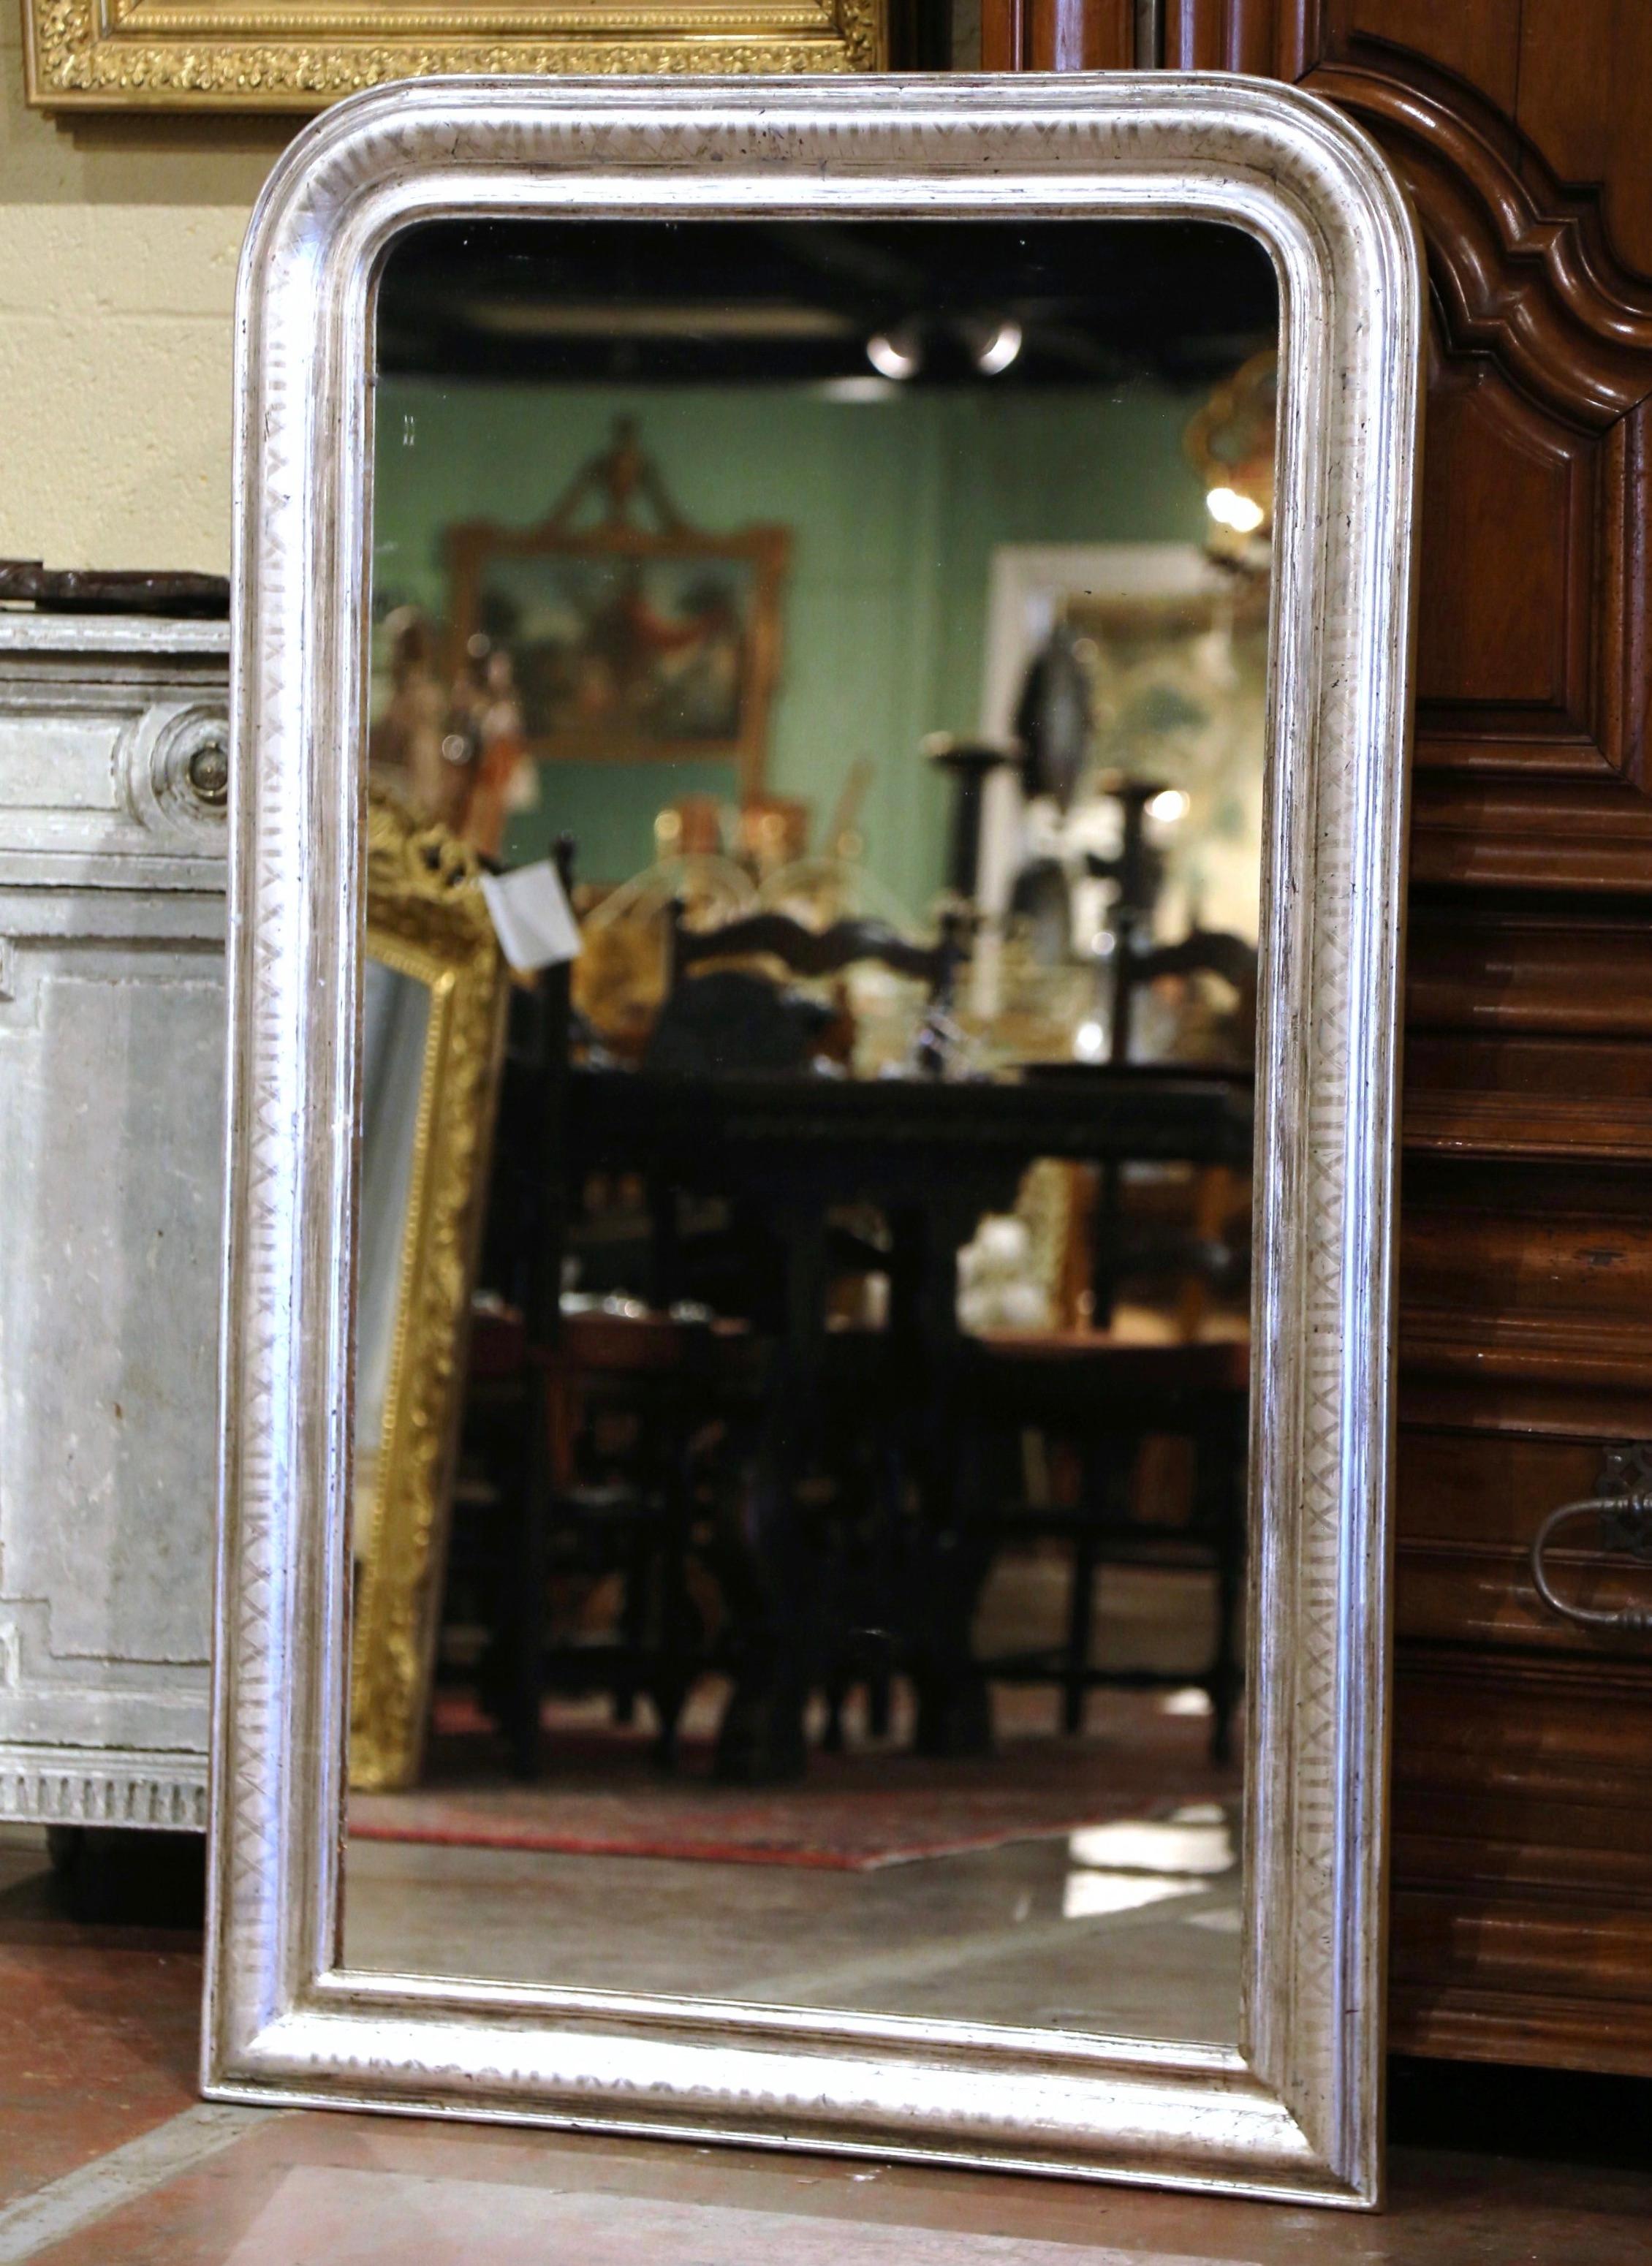 Crafted in the Burgundy region of France, circa 1880, the large antique mirror has traditional, timeless lines with rounded corners. The rectangular frame is decorated with a luxurious silver leaf finish over discrete engraved two-tone geometric